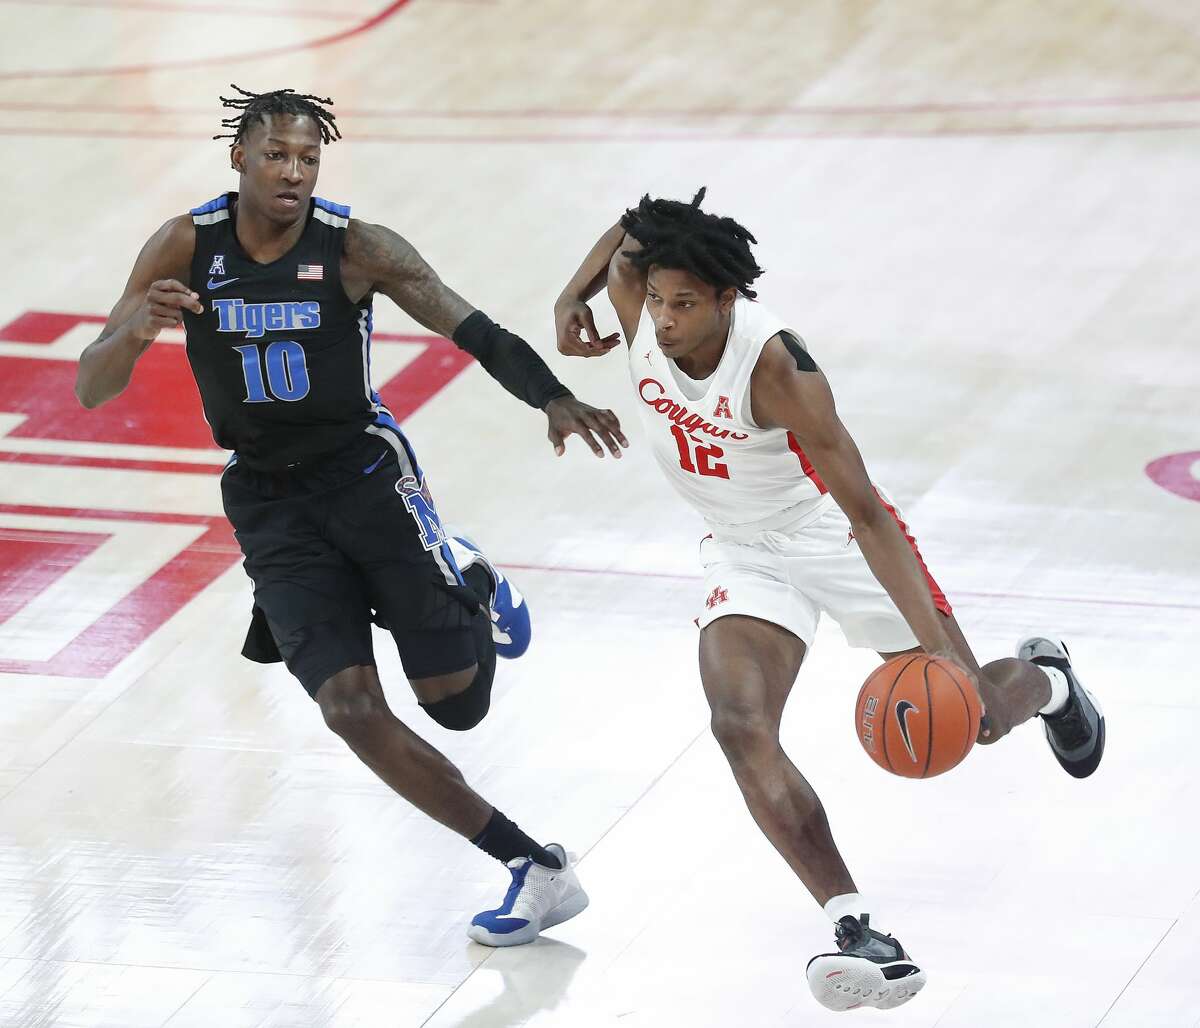 Houston Cougars guard Tramon Mark (12) heads up the court against Memphis Tigers guard Damion Baugh (10) during the second half of an NCAA Menâs basketball game at the Fertitta Center, Sunday, March 7, 2021, in Houston.